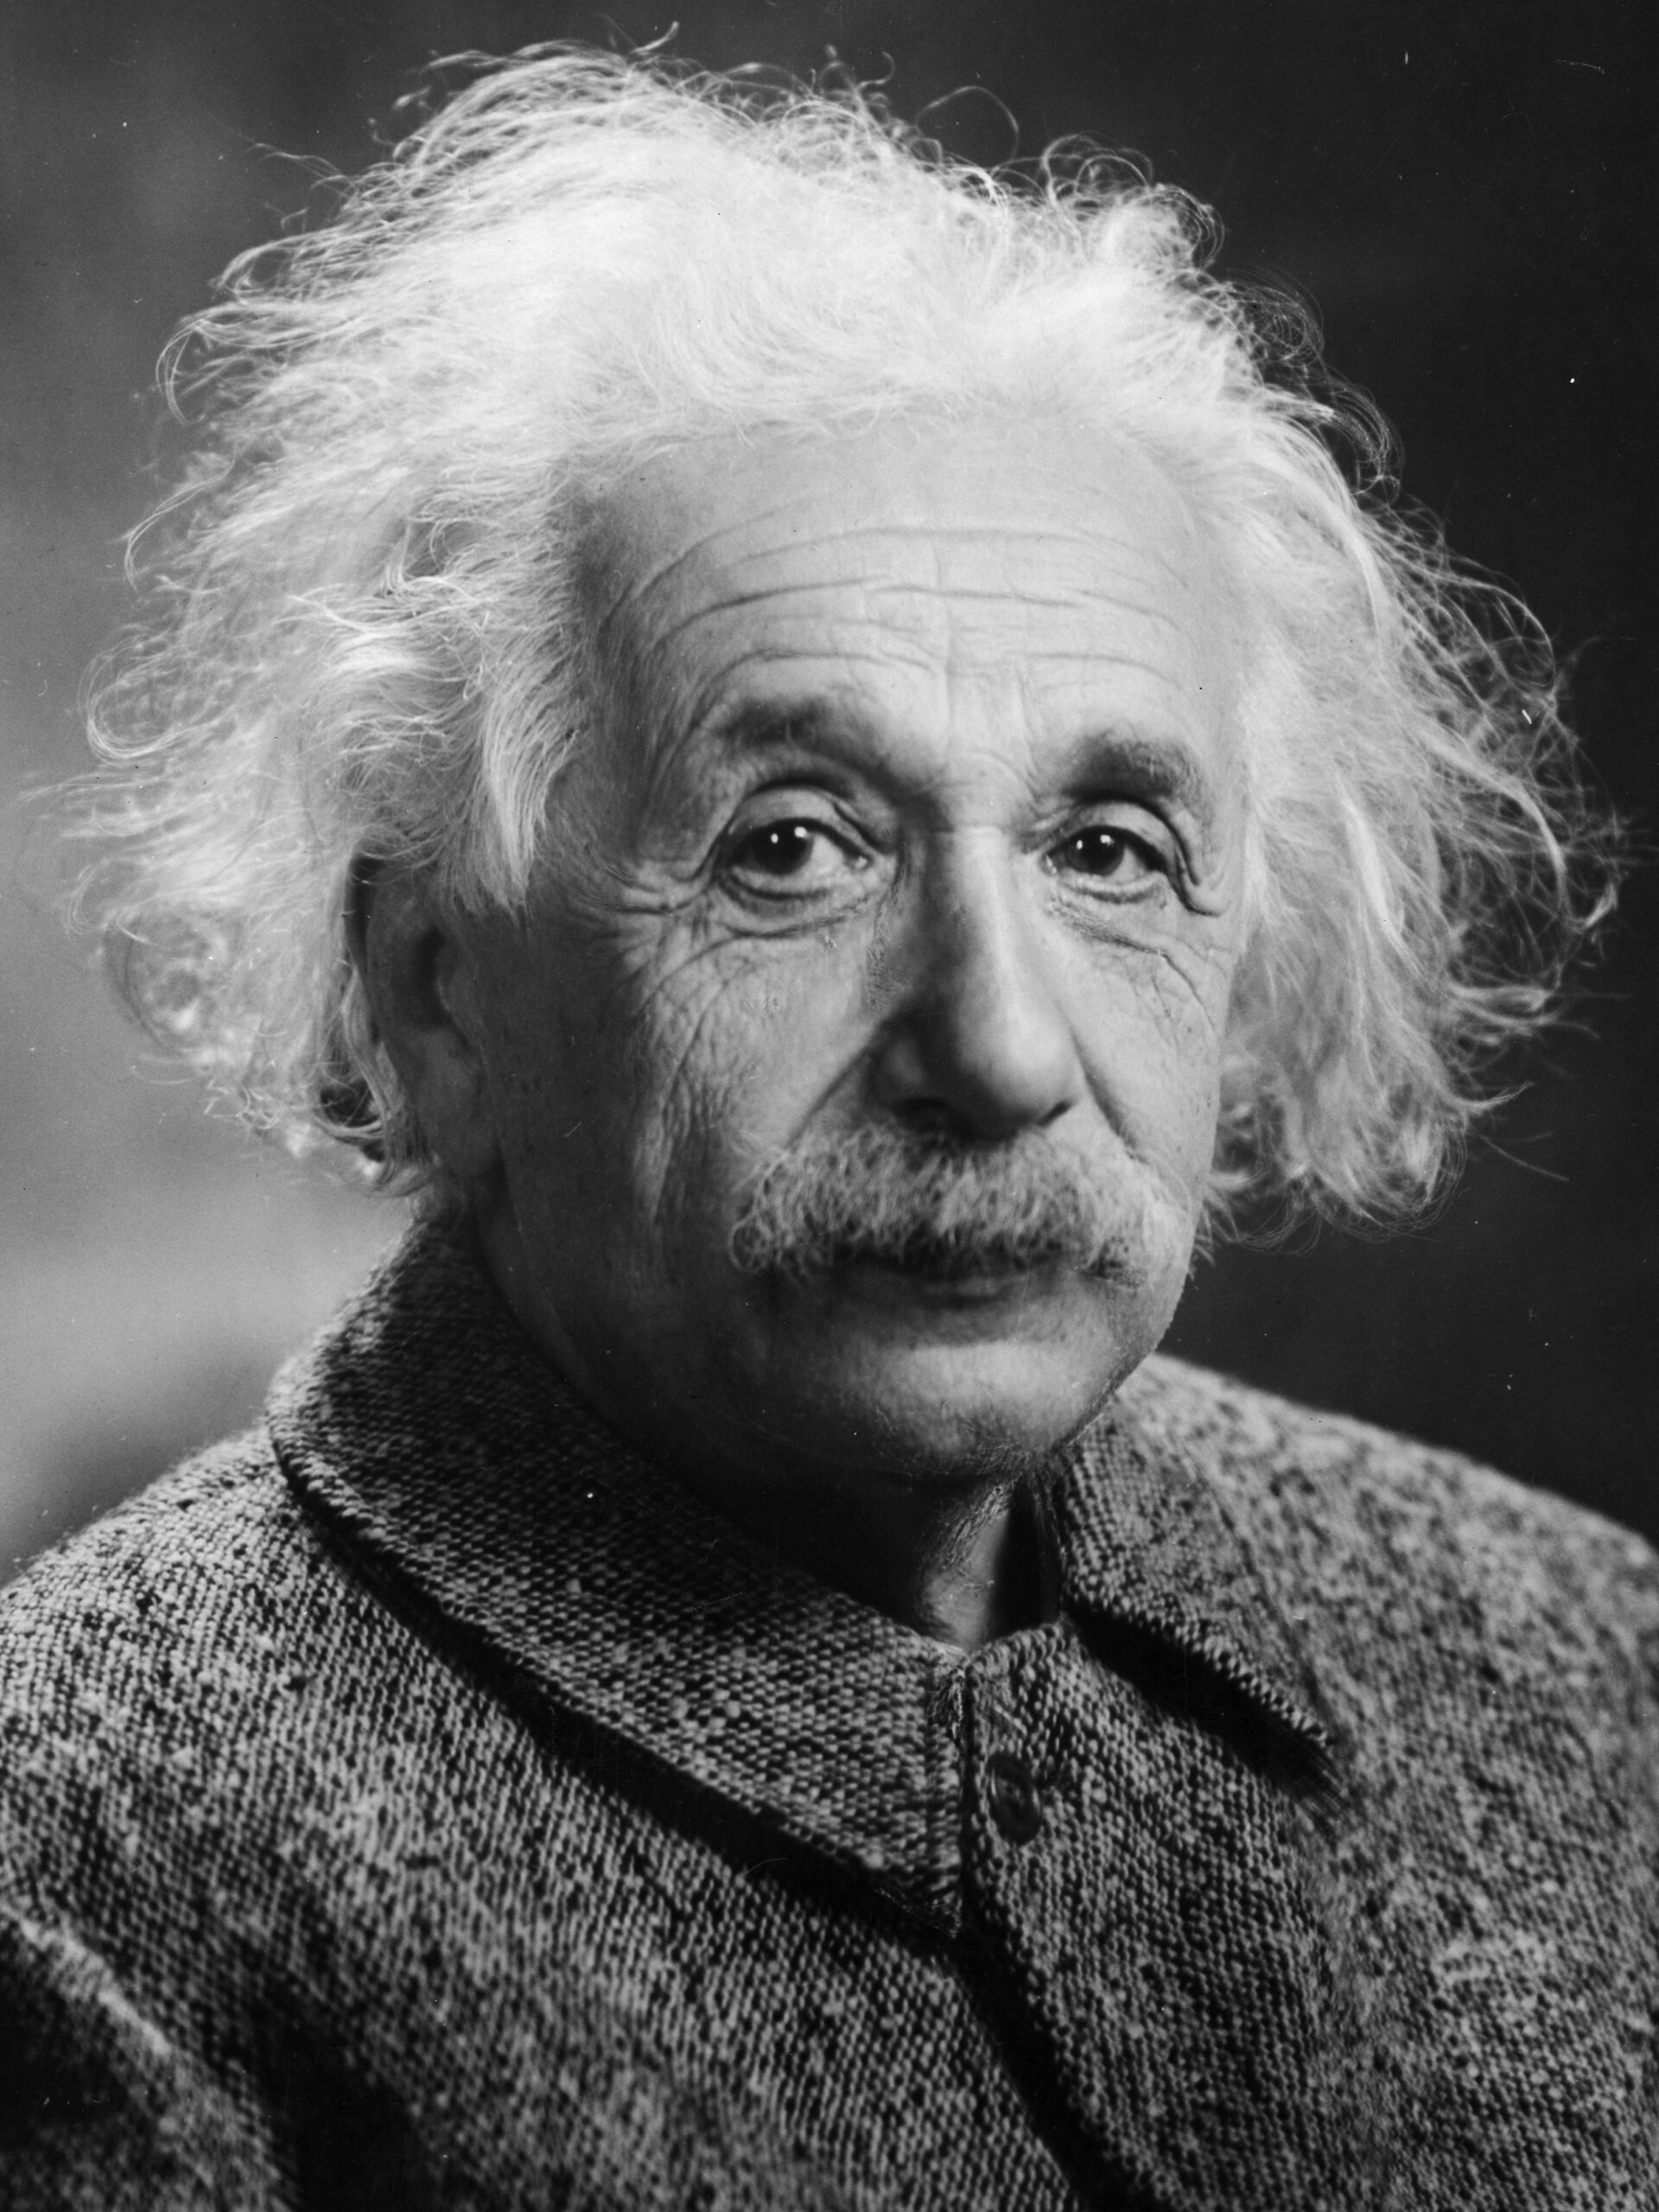 who wrote the biography of albert einstein